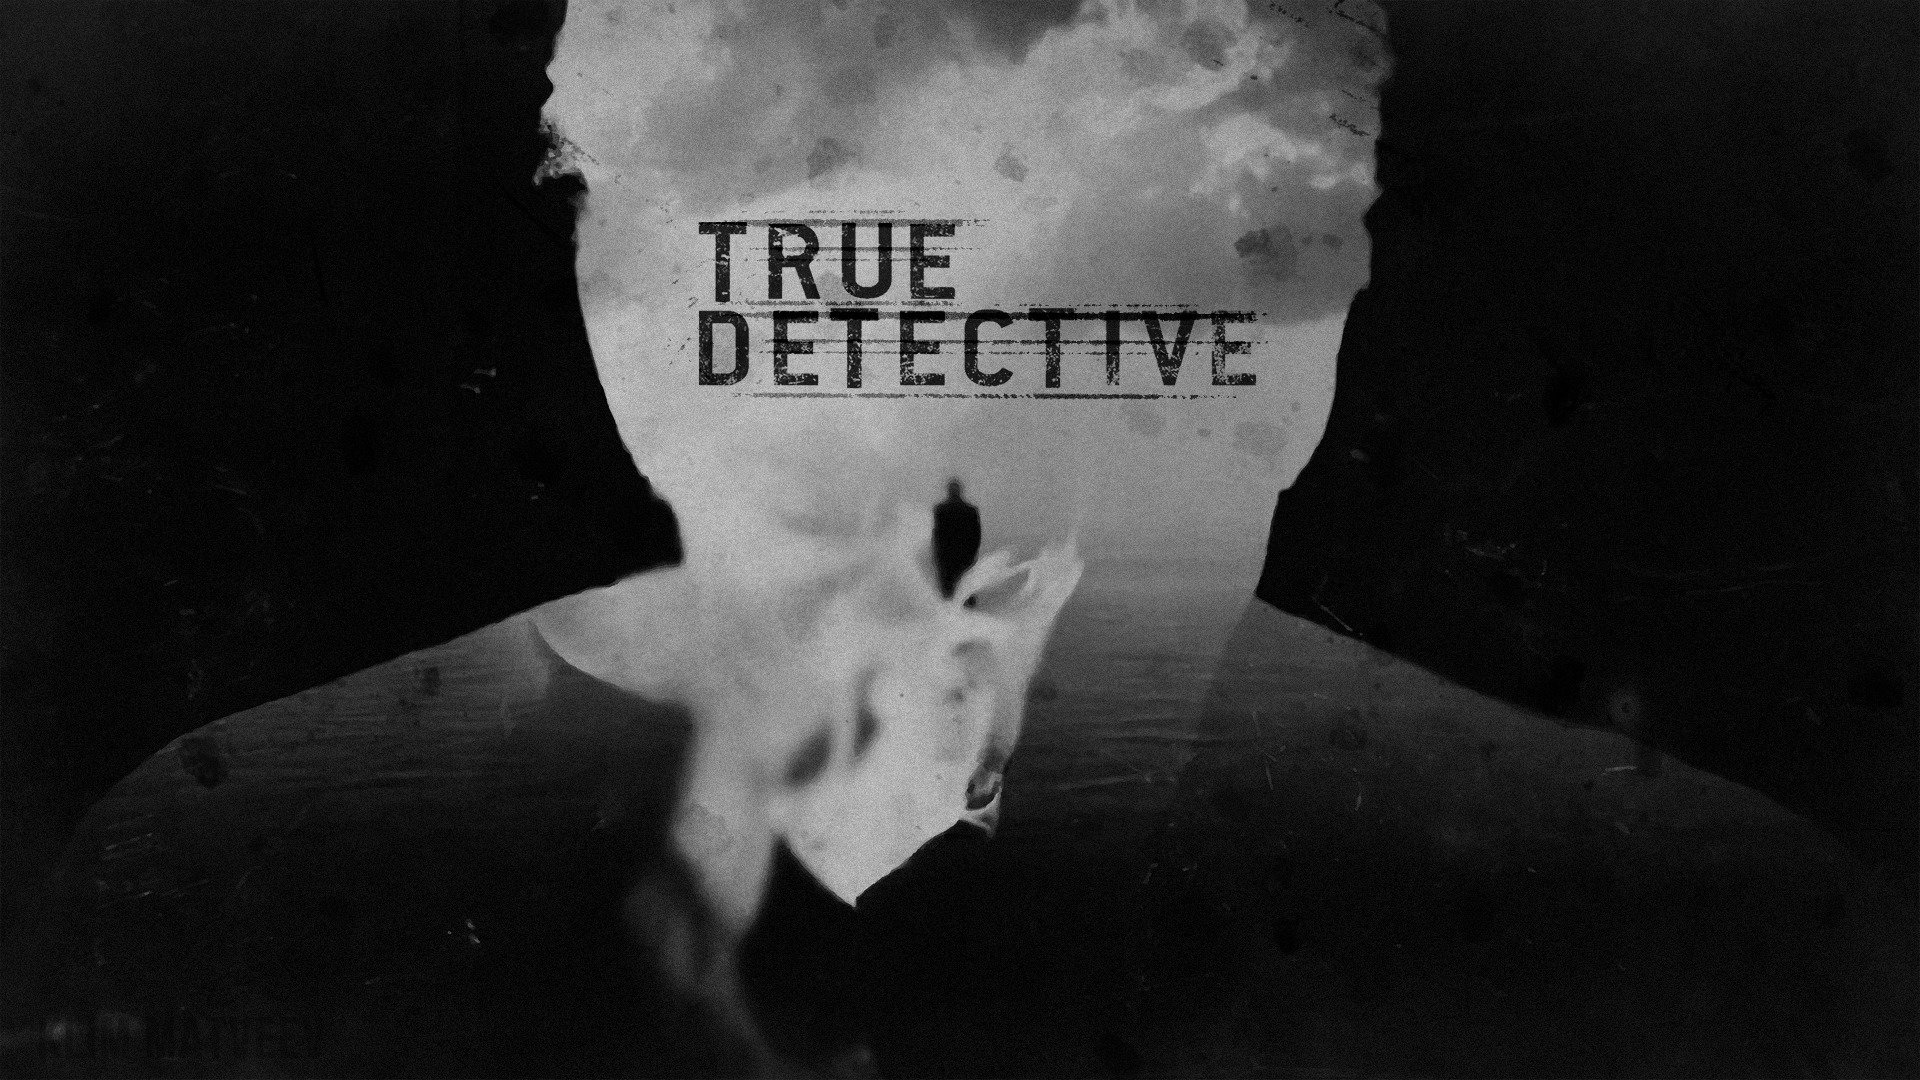 Download full hd 1920x1080 True Detective PC background ID:256136 for free